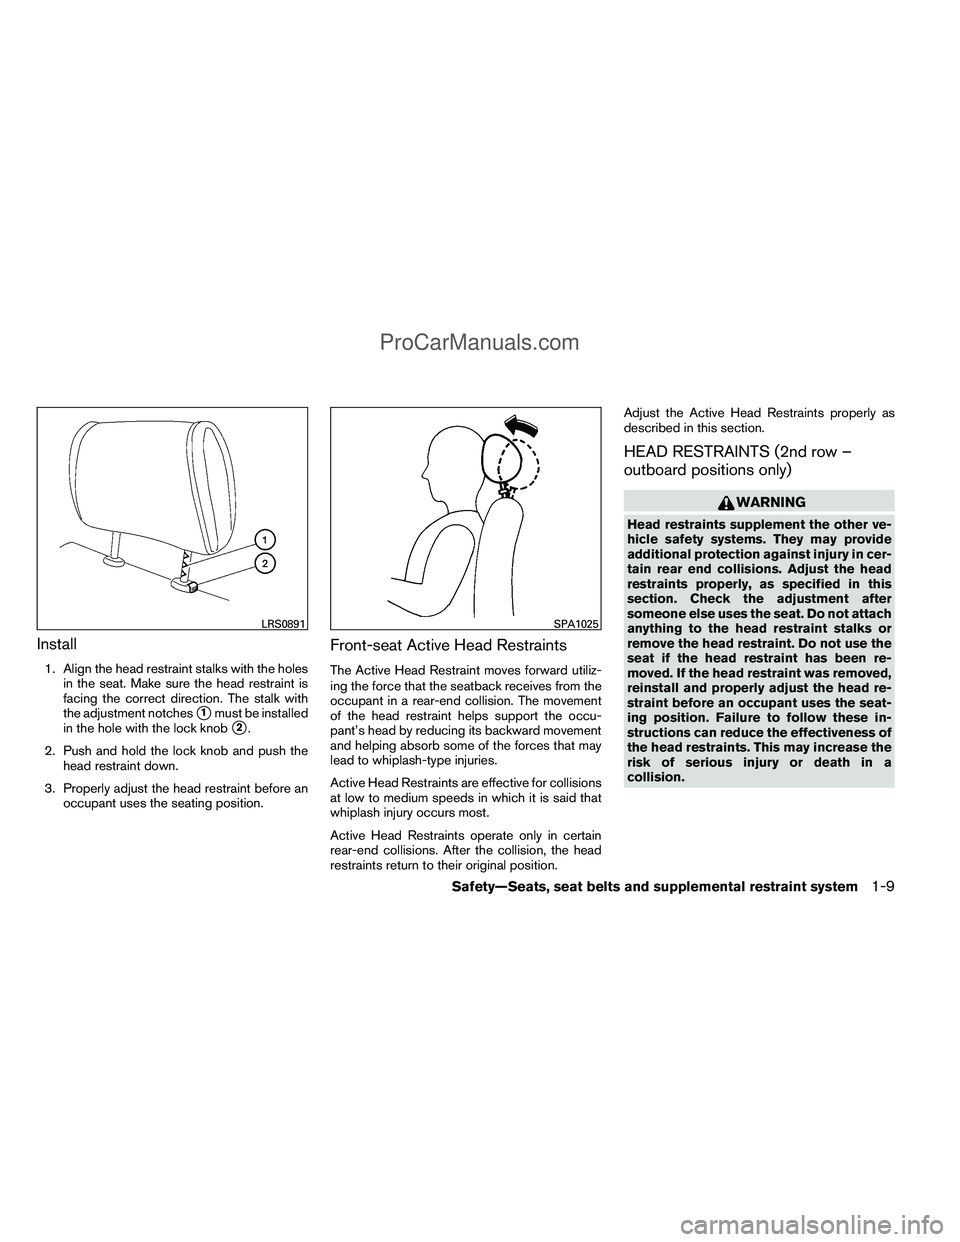 NISSAN TITAN 2012 Owners Manual Install
1. Align the head restraint stalks with the holesin the seat. Make sure the head restraint is
facing the correct direction. The stalk with
the adjustment notches
1must be installed
in the hol